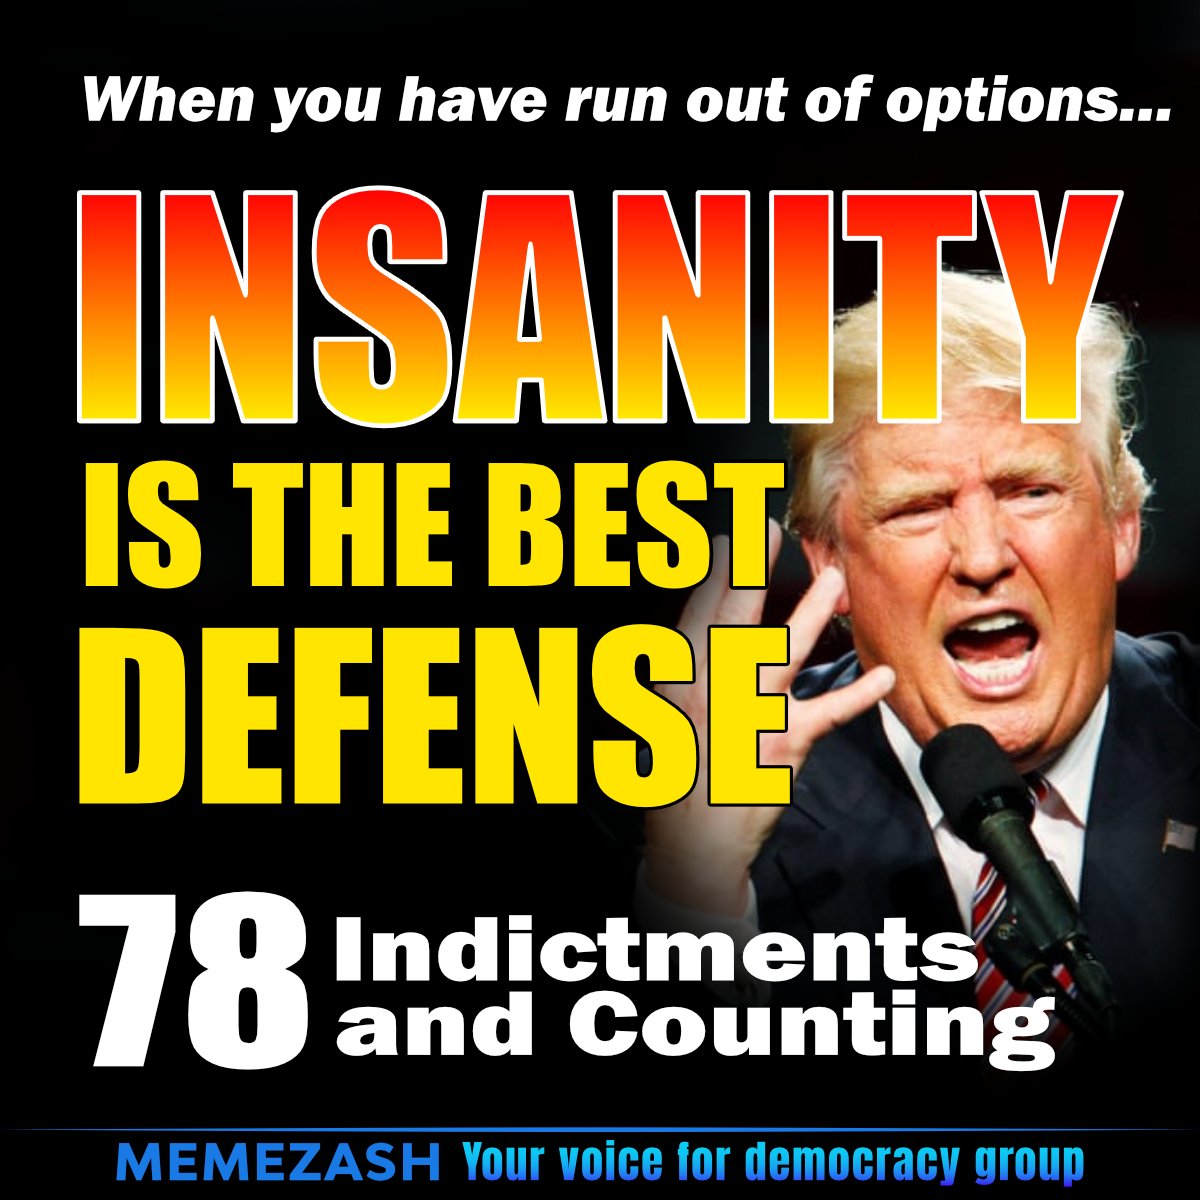 An Insanity Defense for Trump
would likely backfire in his face, even as a last resort to staying out of jail for the rest of his pathetic life.
#TrumpIndictments #TrumpDefense #InsanityDefense